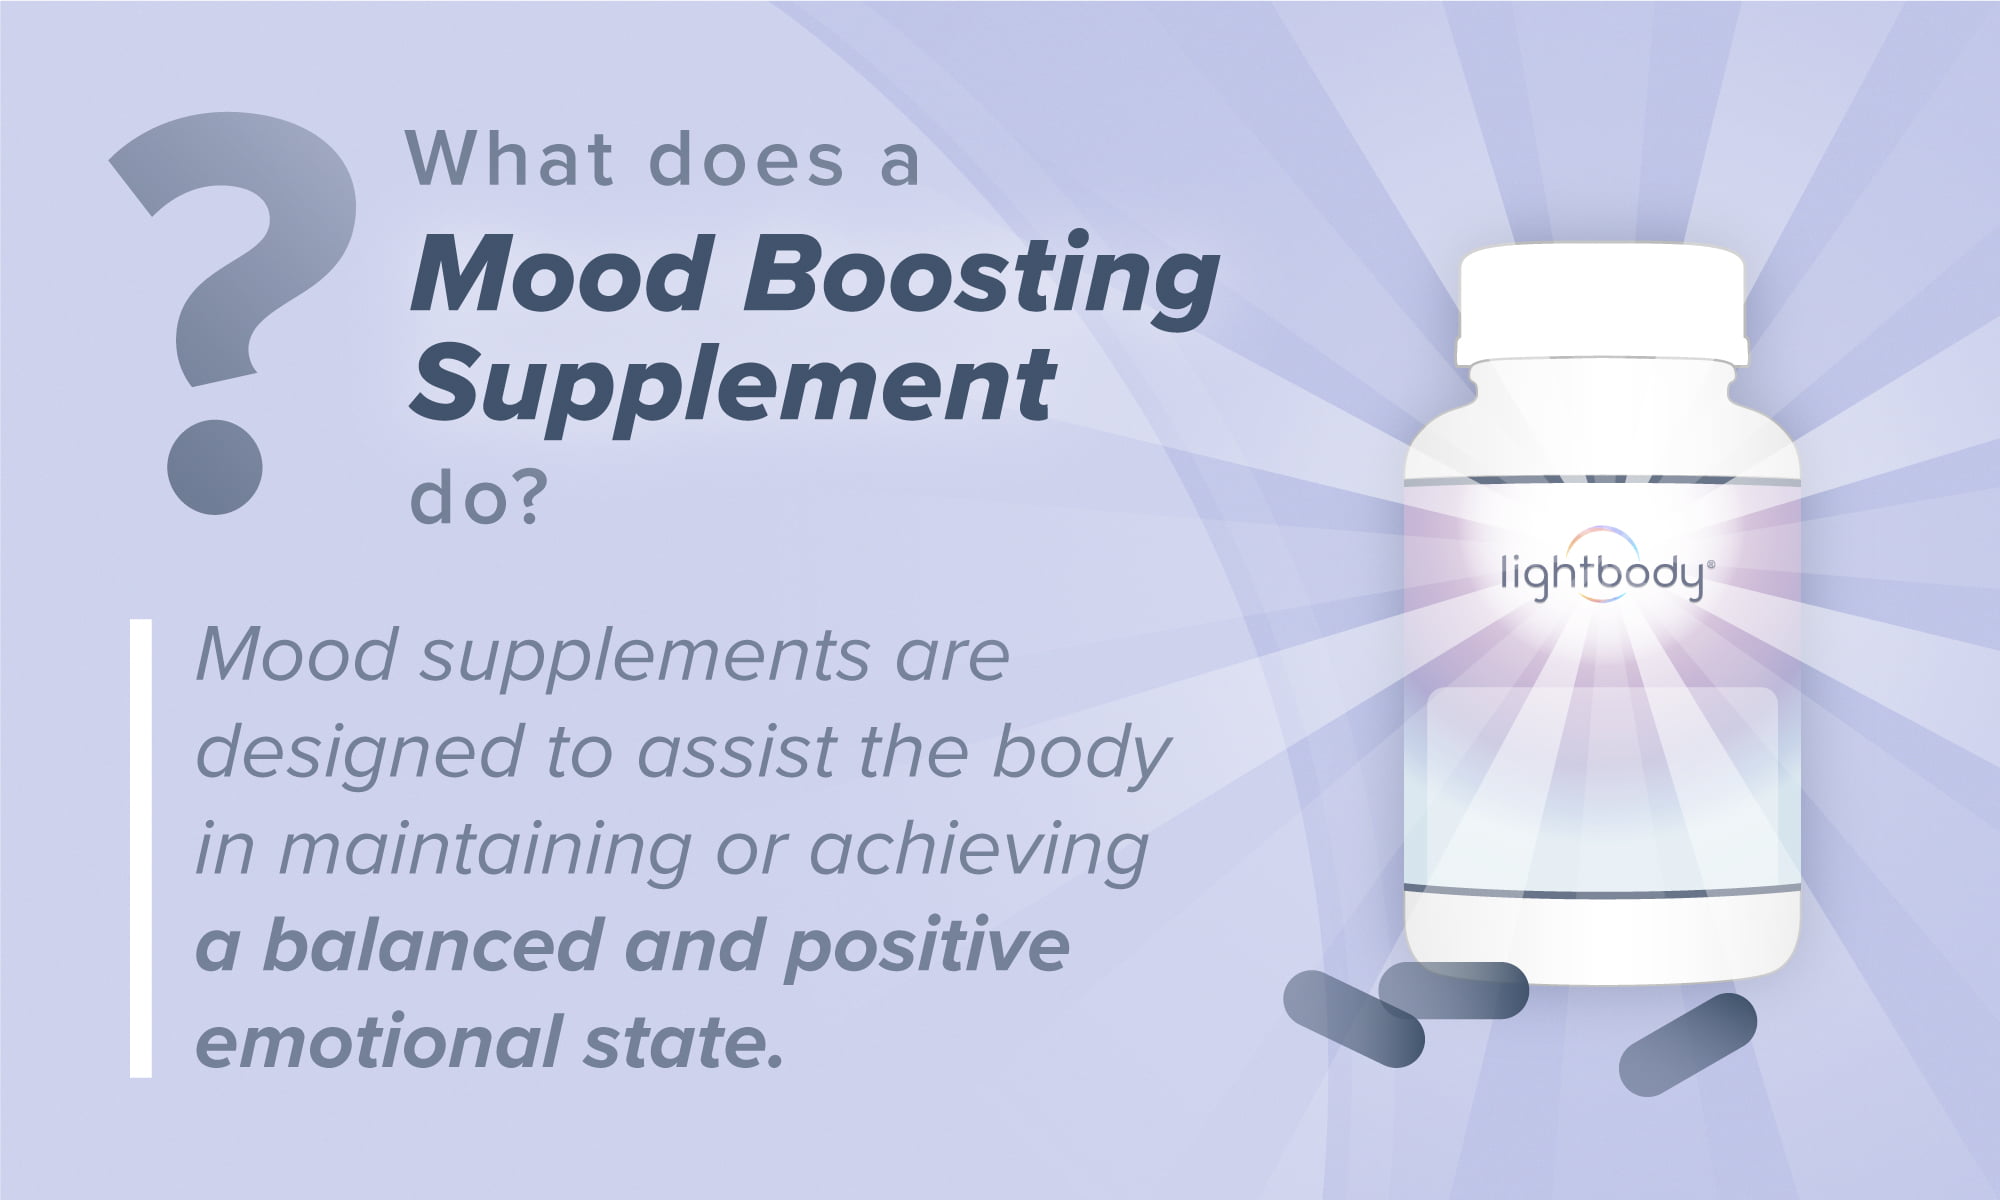 An infographic presenting the Lightbodylabs supplement, including a quote from an article: "Mood supplements are designed to assist the body in maintaining or achieving a balanced and positive emotional state."